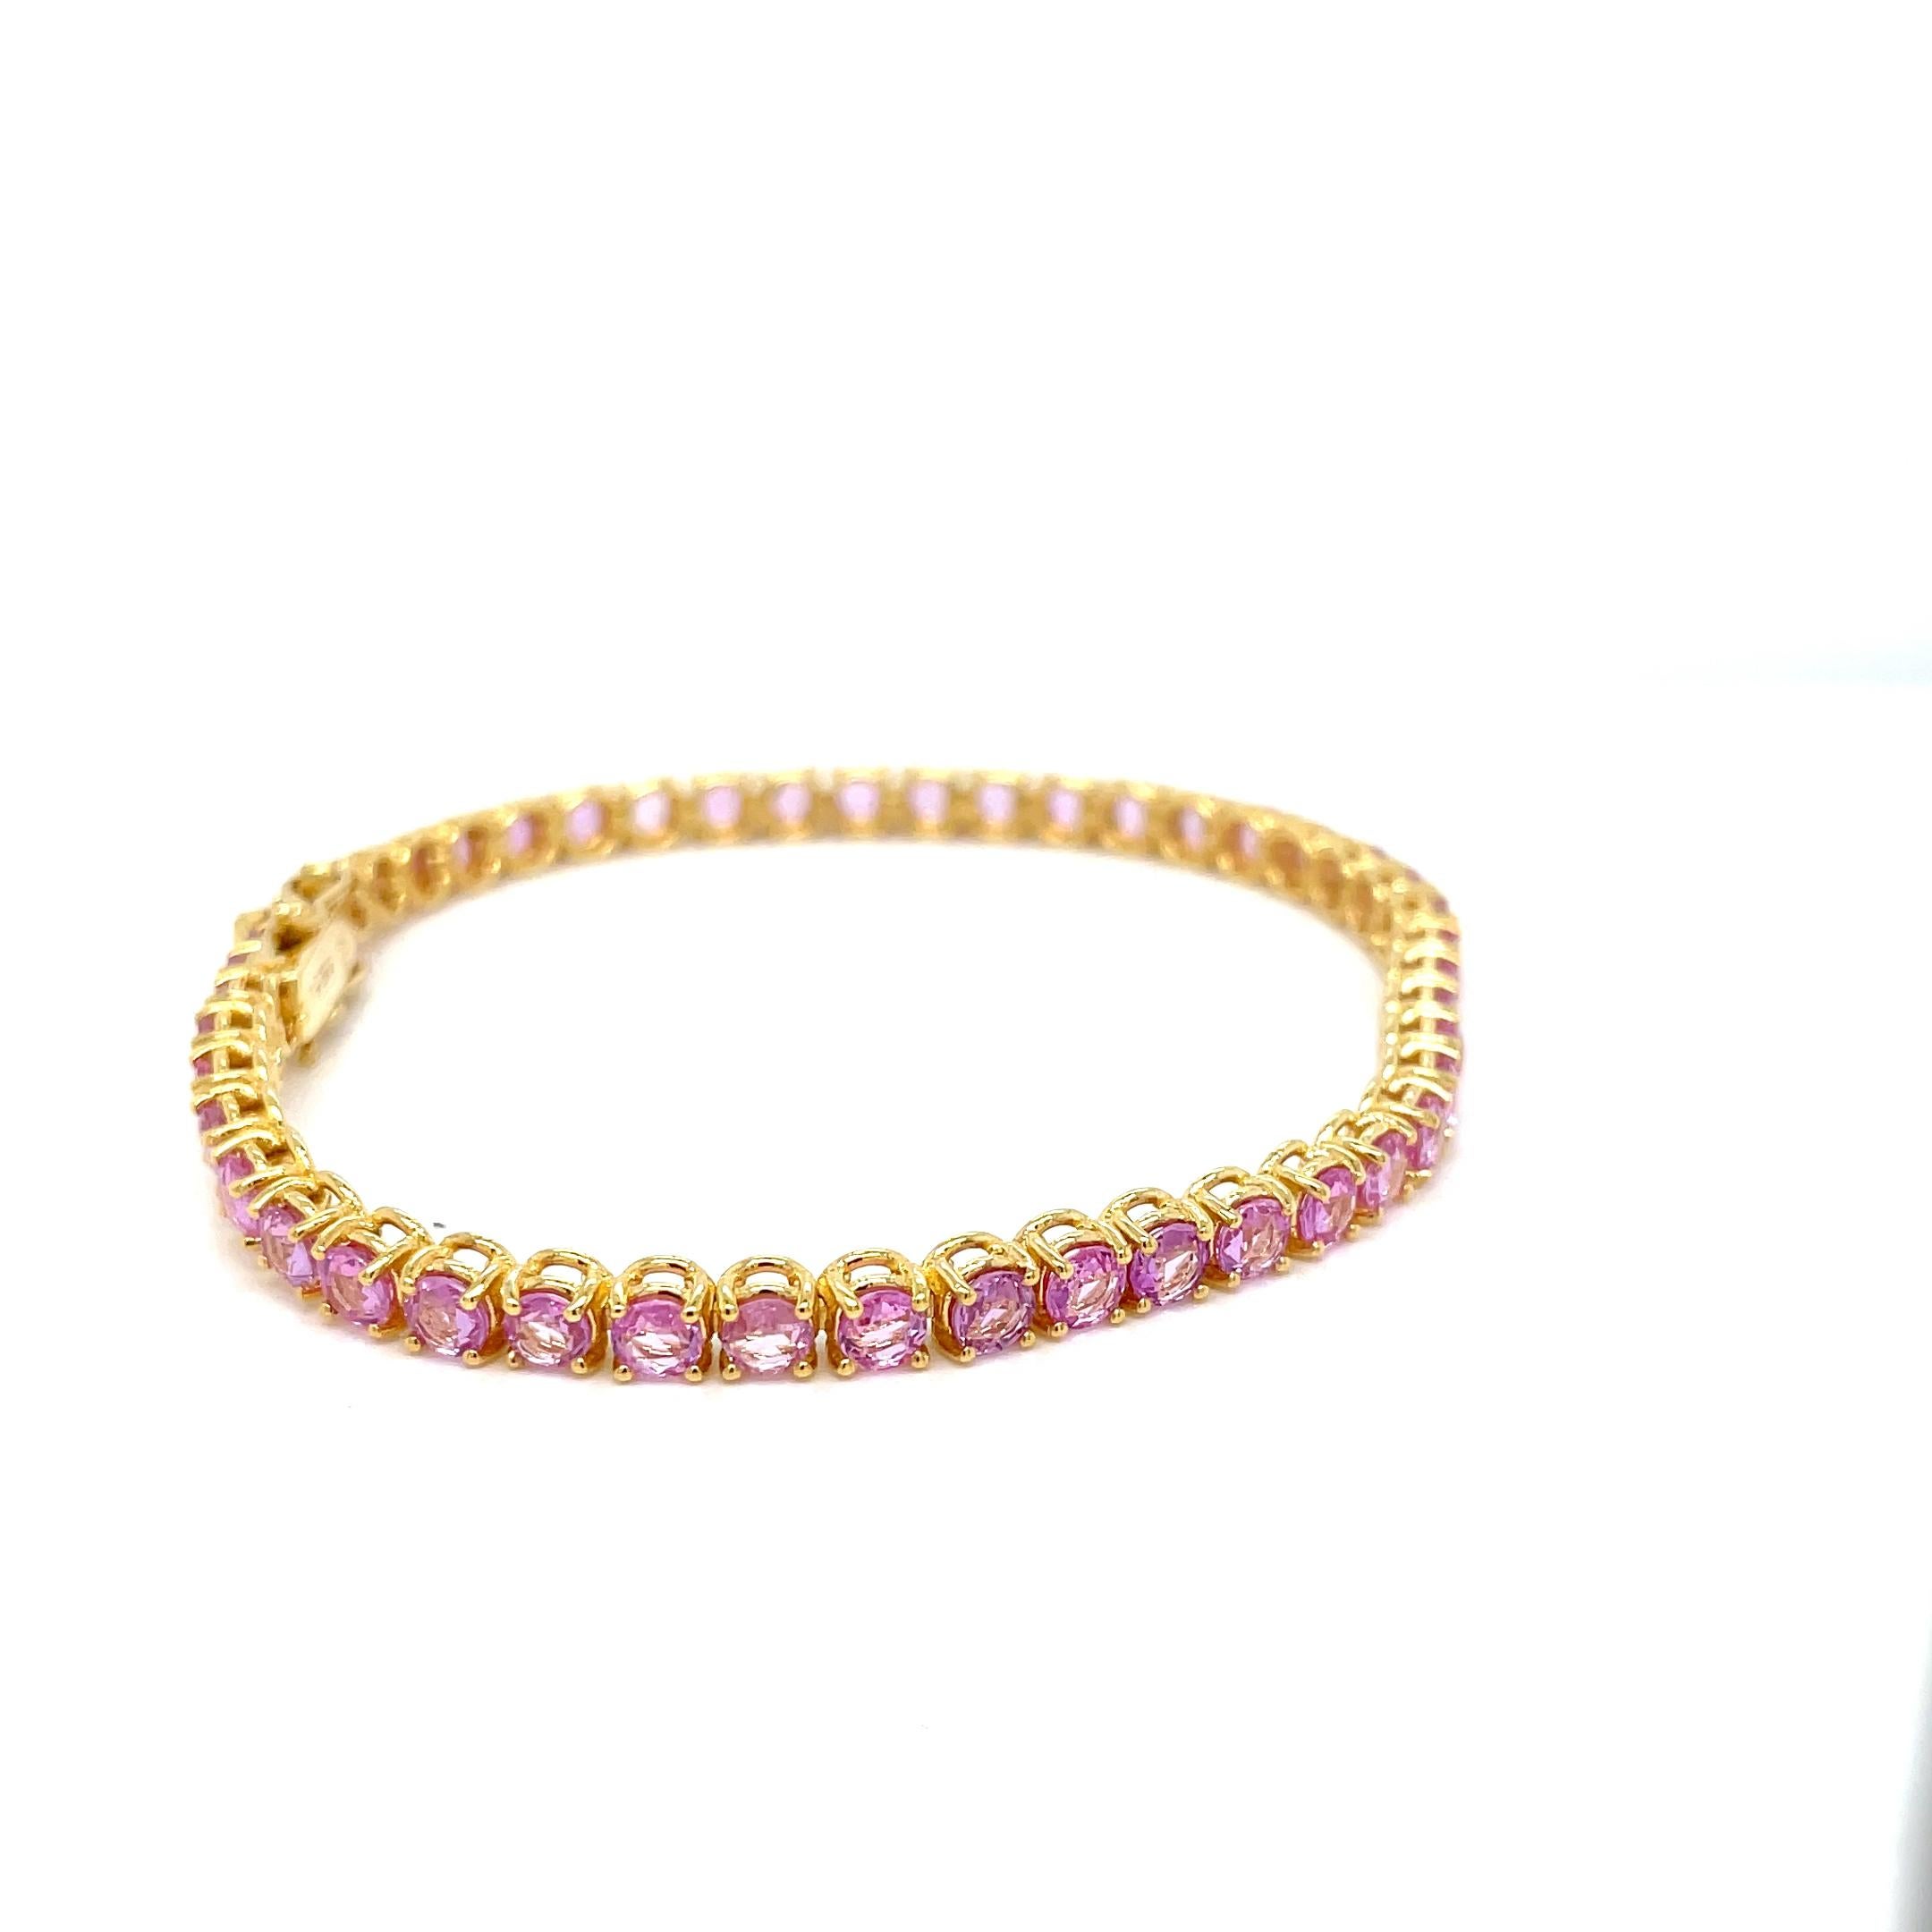 10 Carat Natural Pink Sapphire Yellow Gold Tennis Bracelet For Sale 2